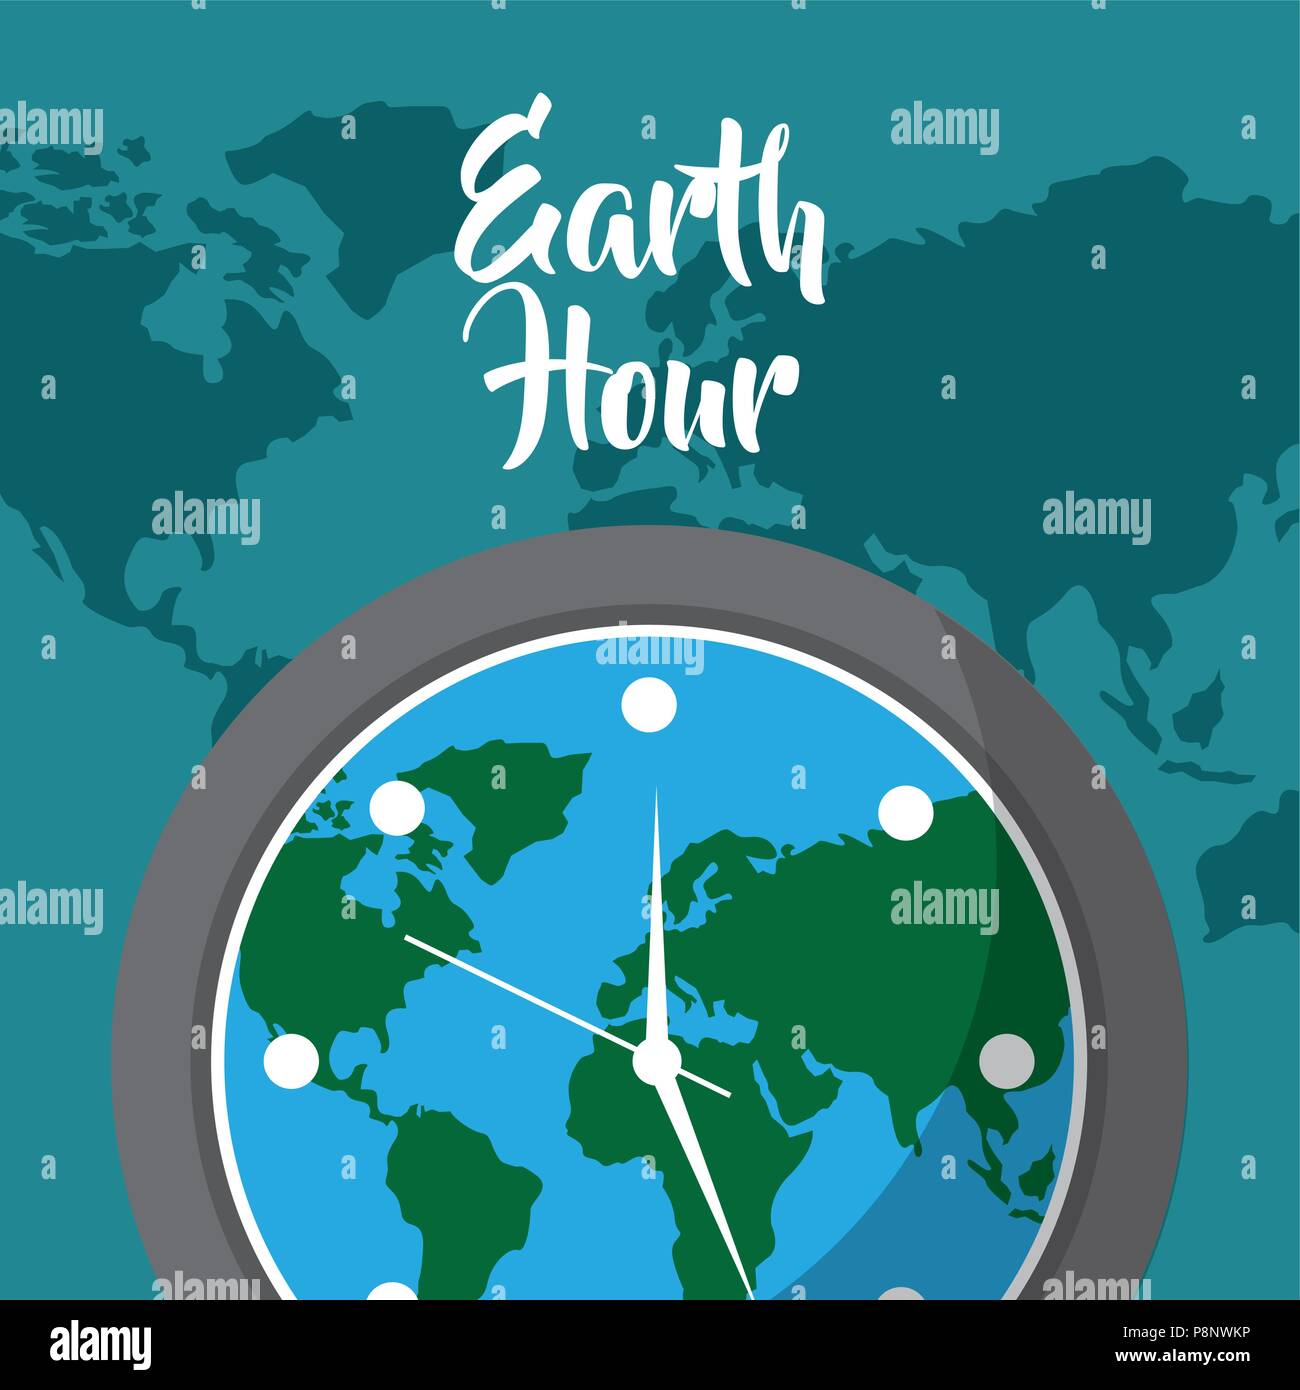 earth hour clock map world background vector illustration Stock ...